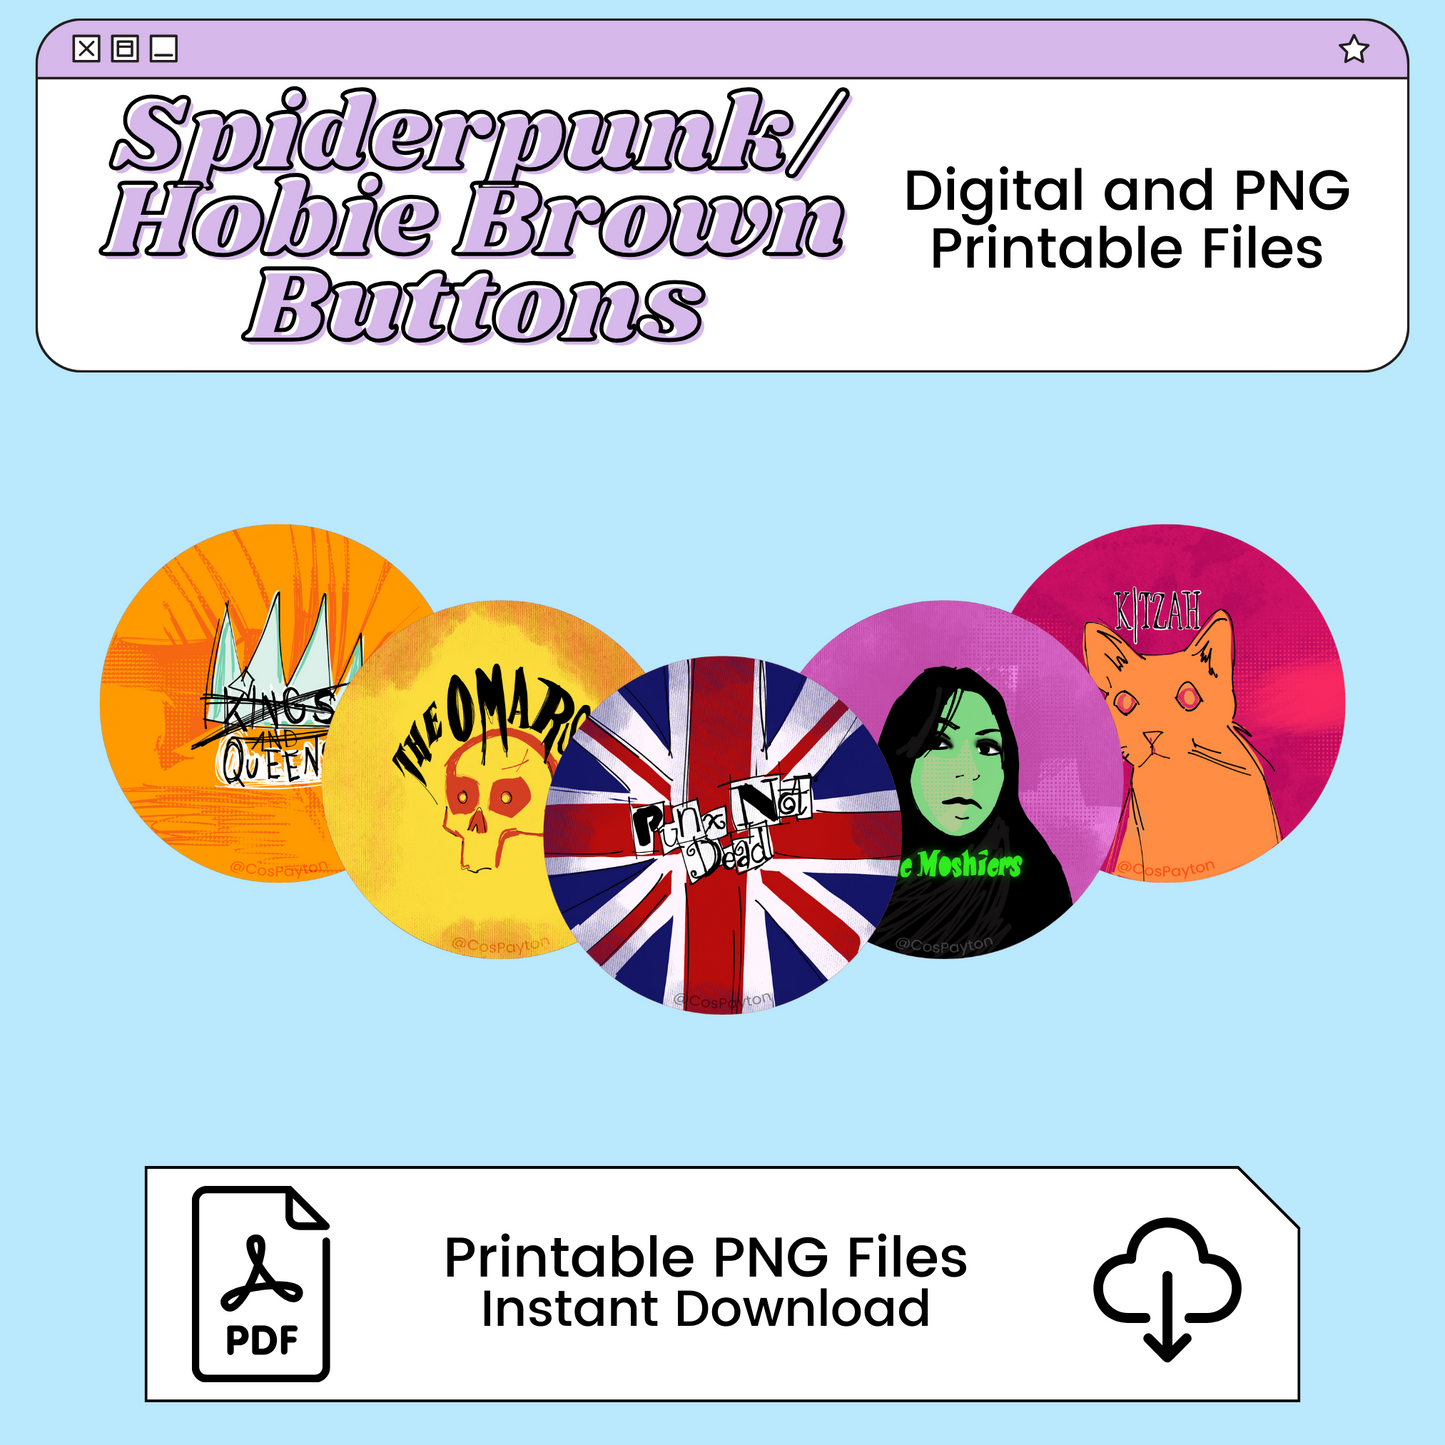 Hobie/Spiderpunk Jacket Button Template PNG | Instant Download Digital Files for Cosplay